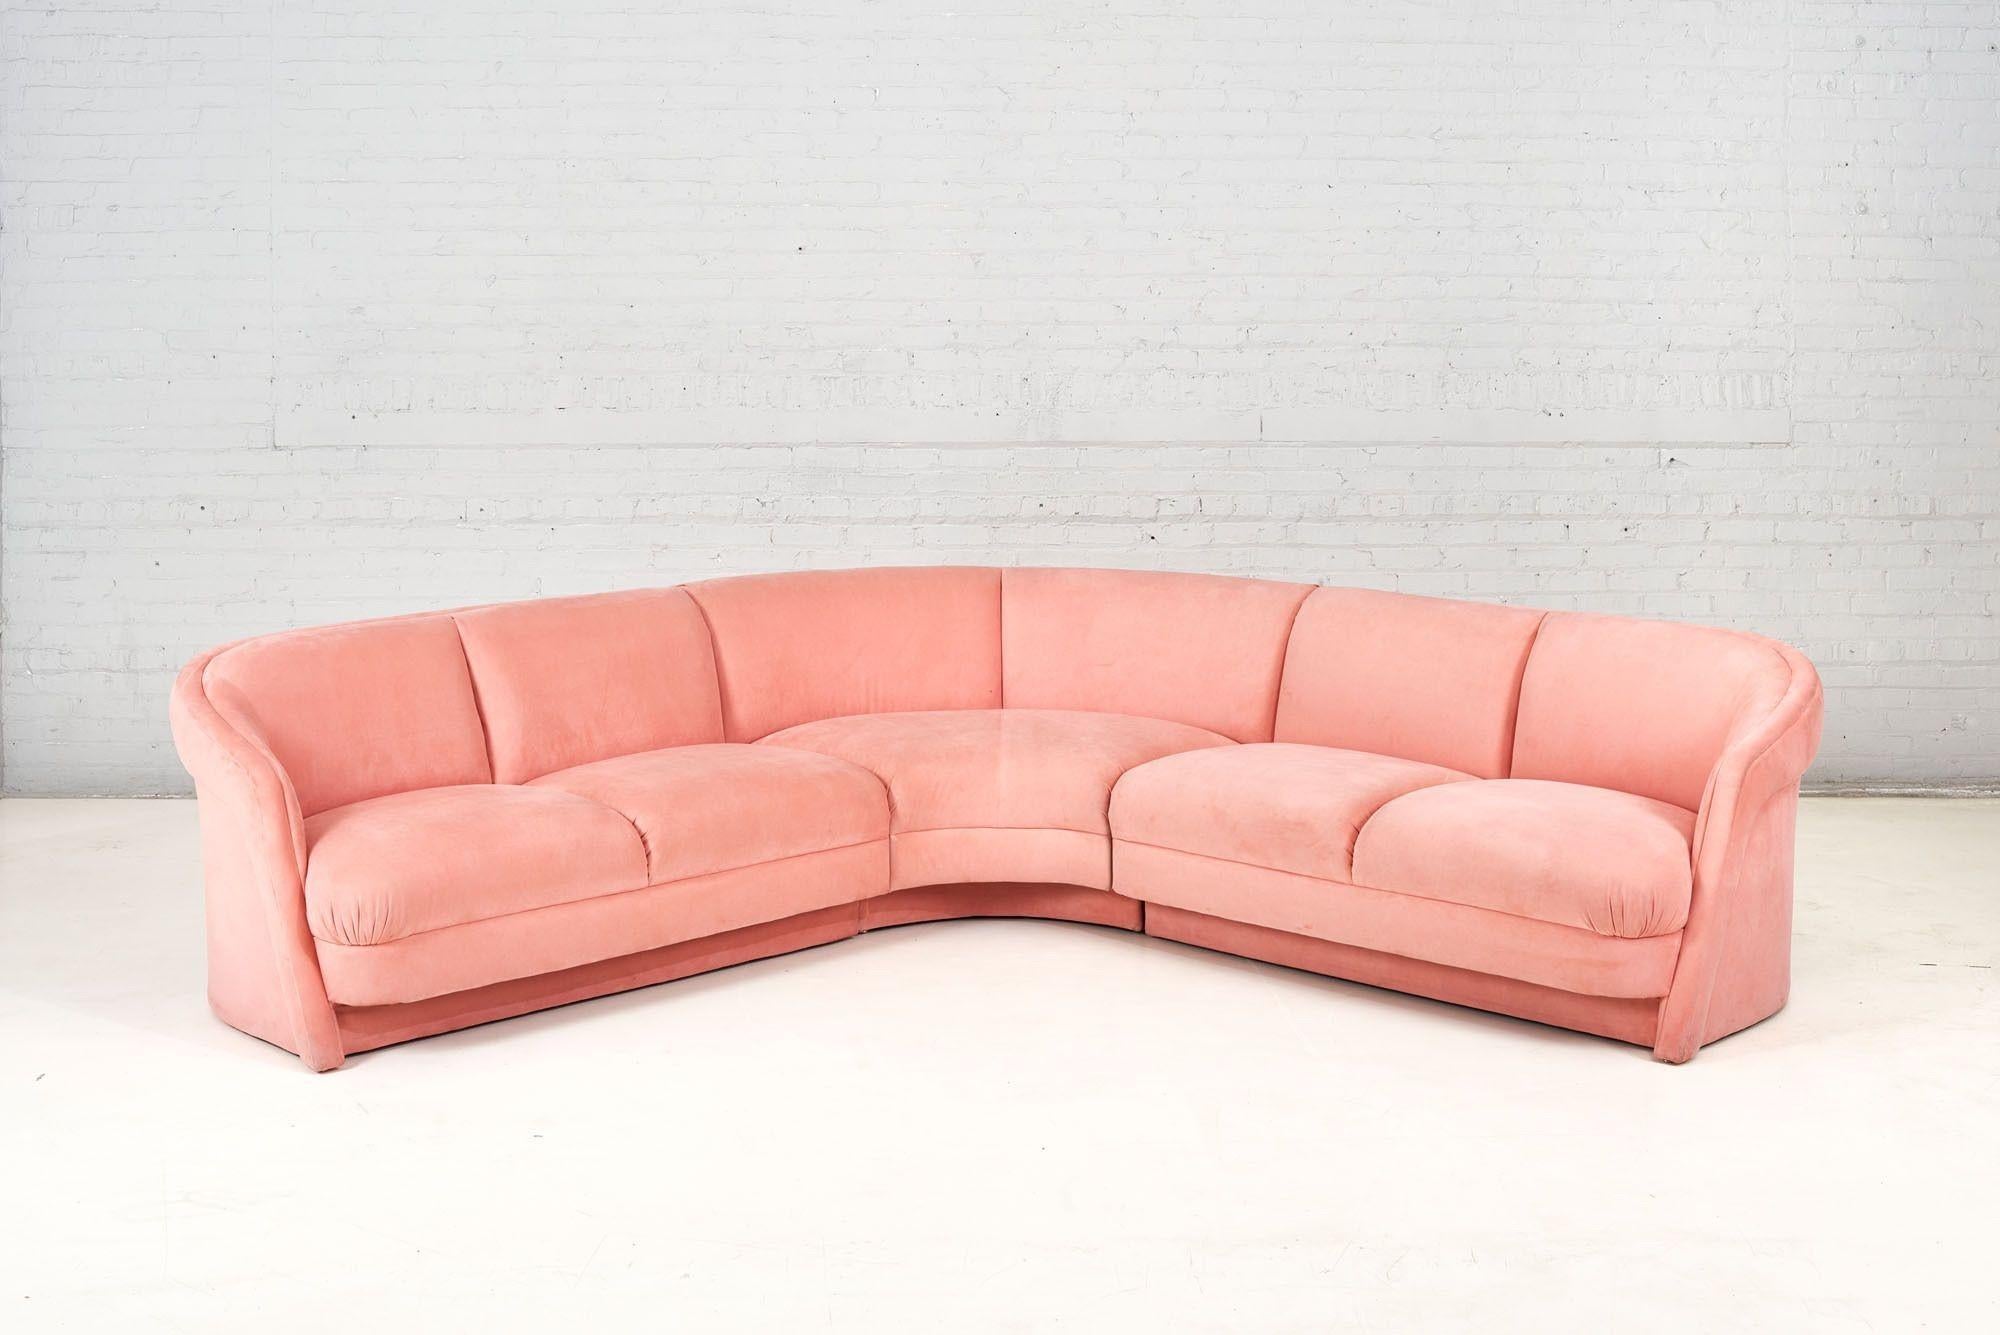 Pink Postmodern Sectional sofa in the style ofMilo Baughman for Thayer-Coggin 1980. Original upholstery.